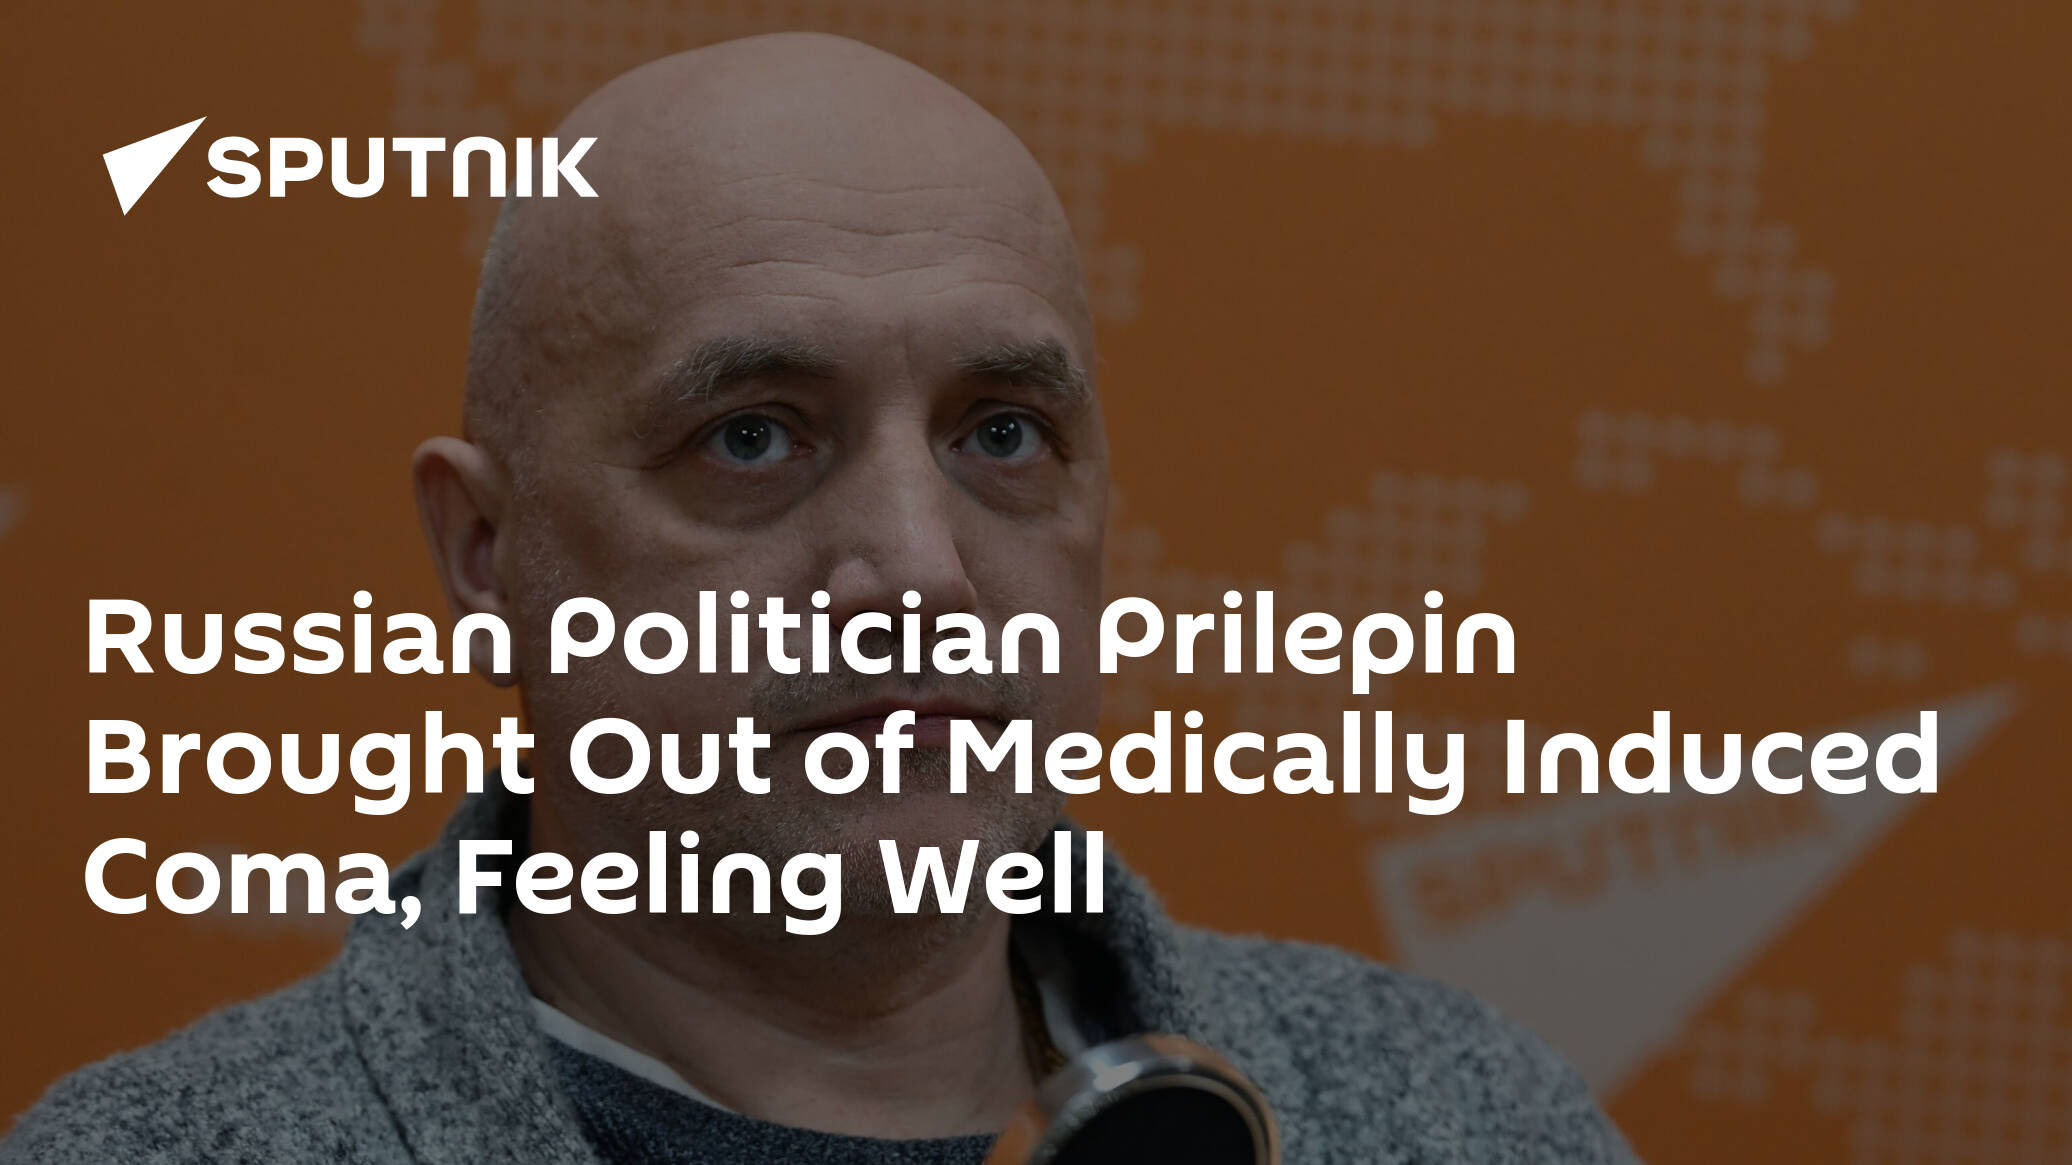 Russian Politician Prilepin Brought Out of Medically Induced Coma, Feeling Well